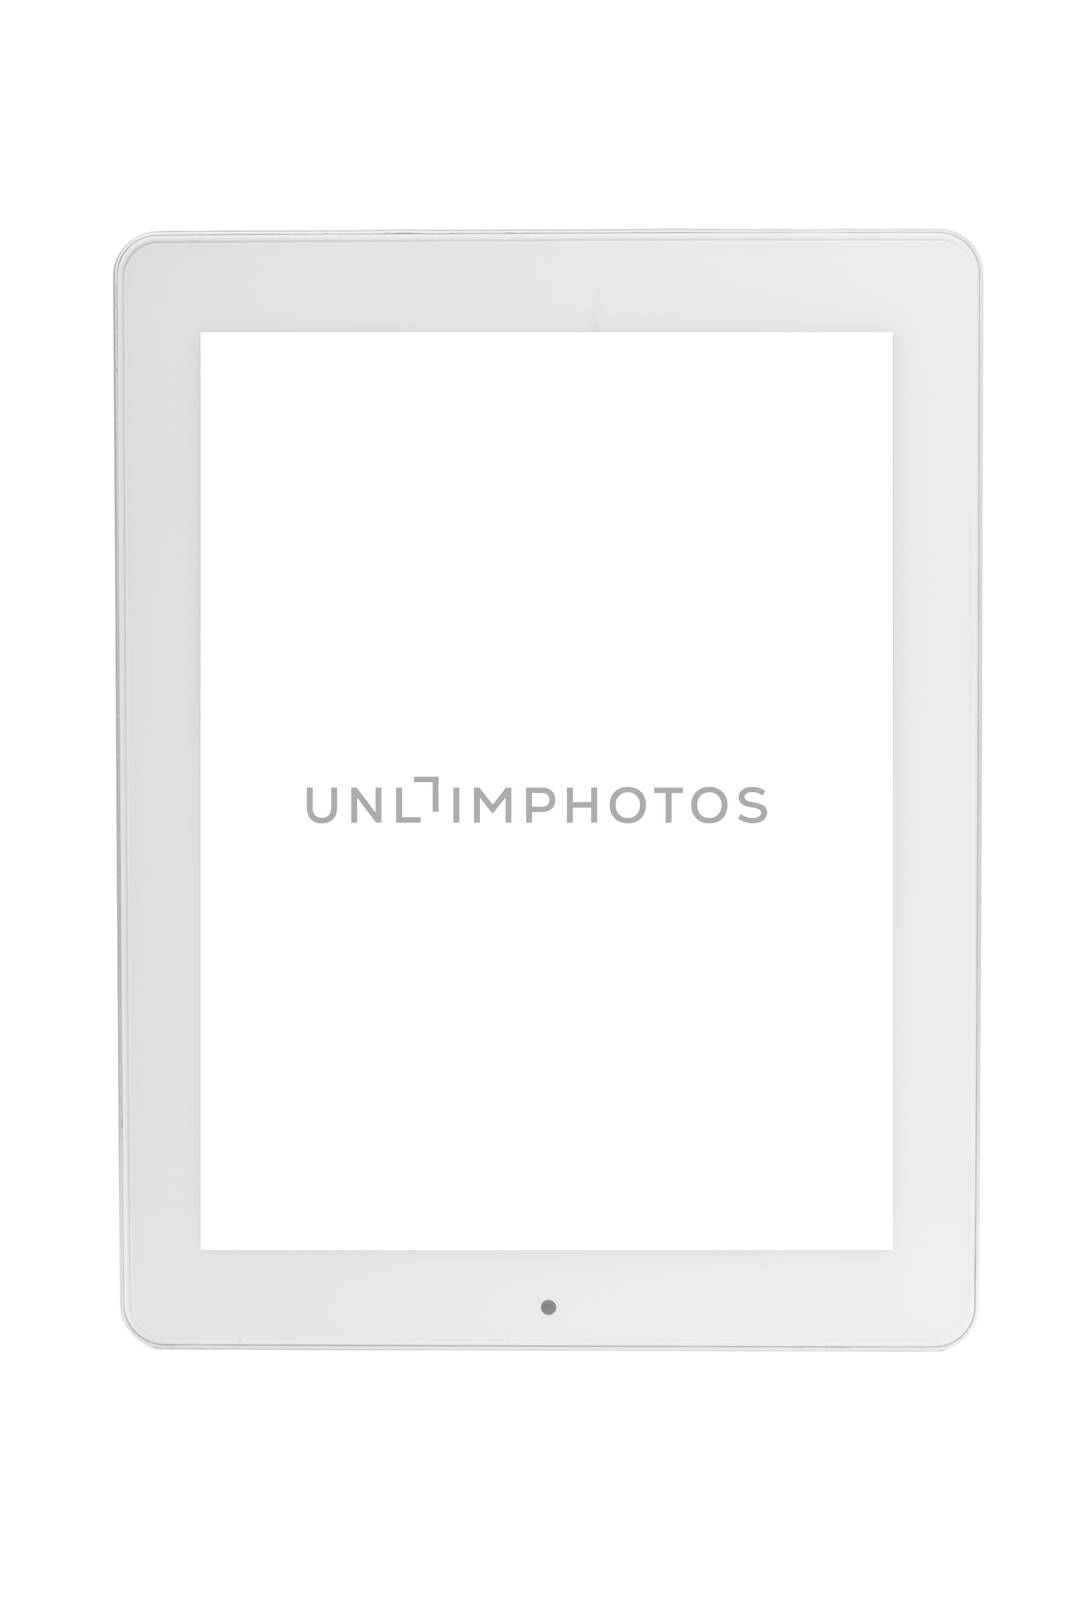 Modern white tablet pc by TpaBMa